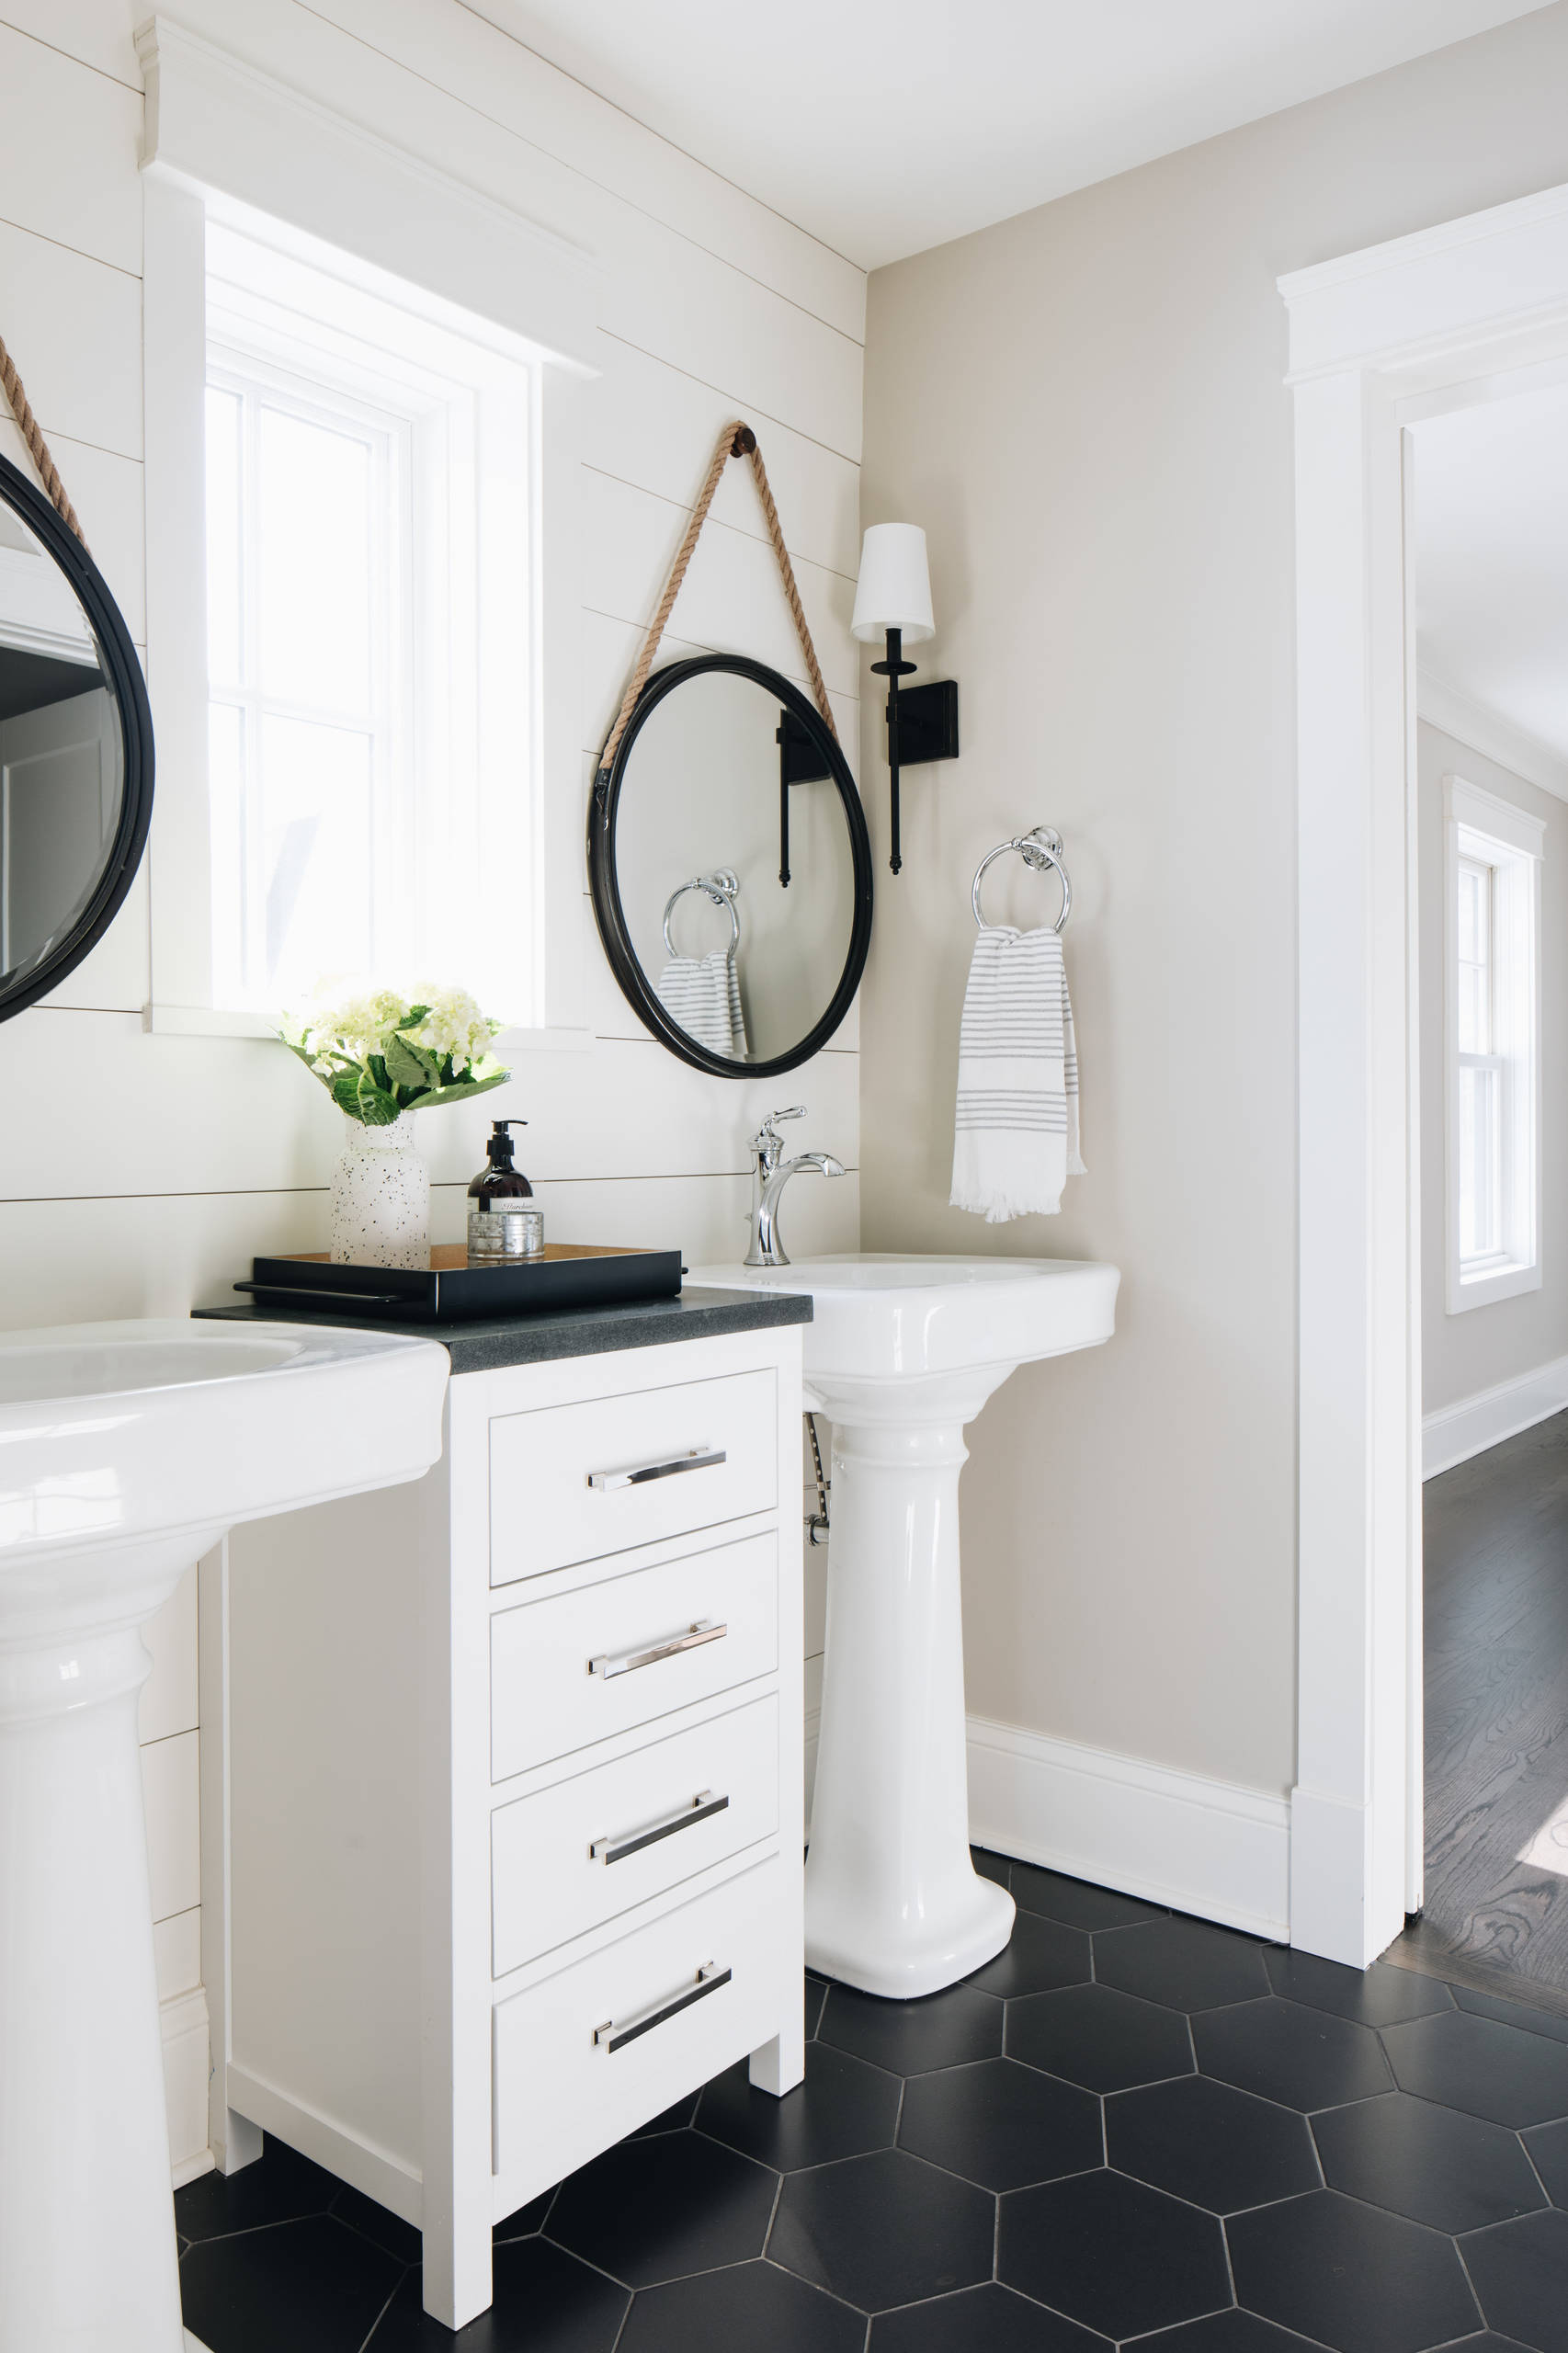 How to build a vanity for a pedestal sink 